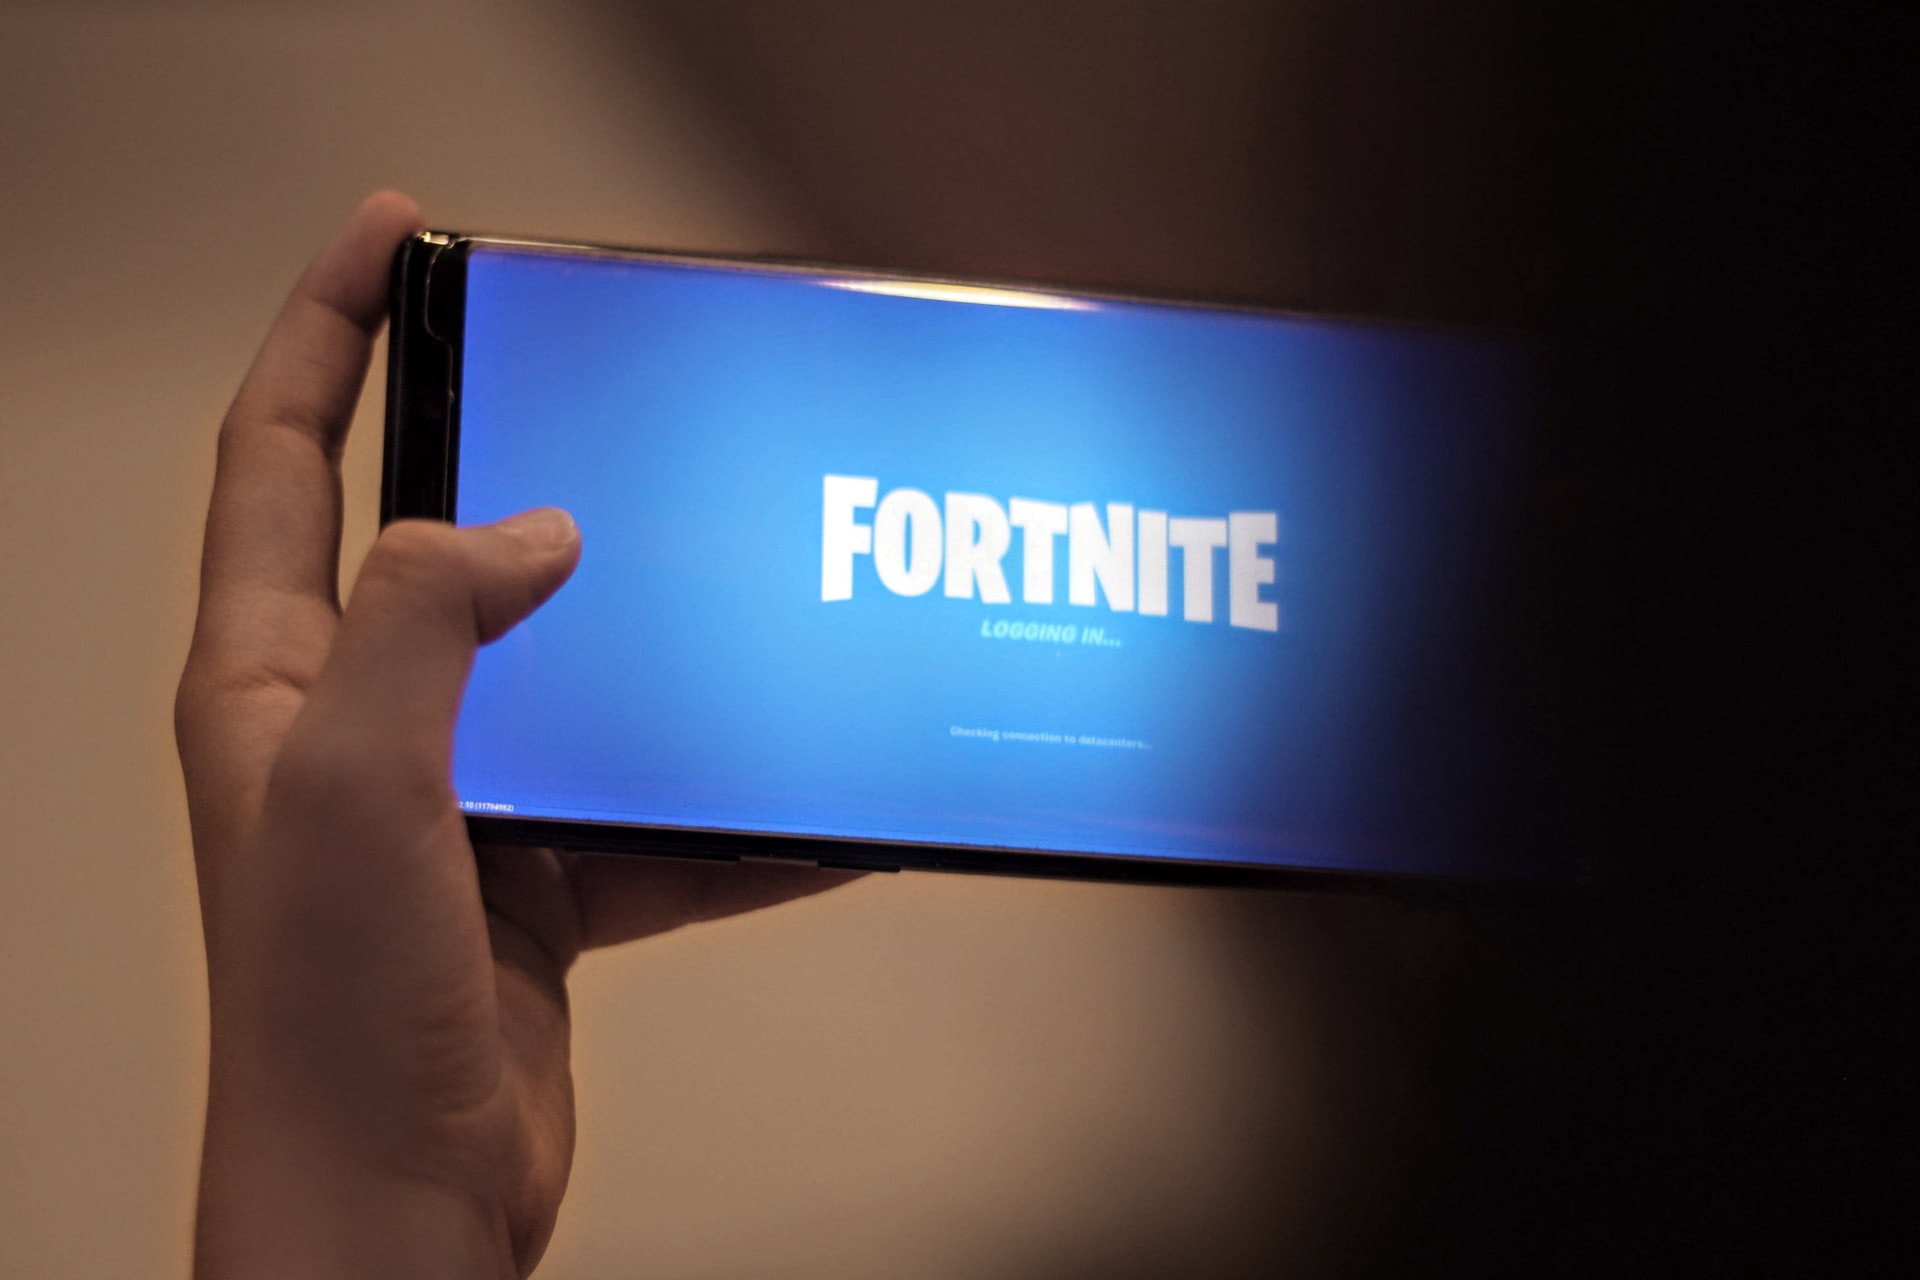 Fortnite’s creator Epic Games has filed a preliminary injunction in an attempt to make reversal on Apple’s app store ban